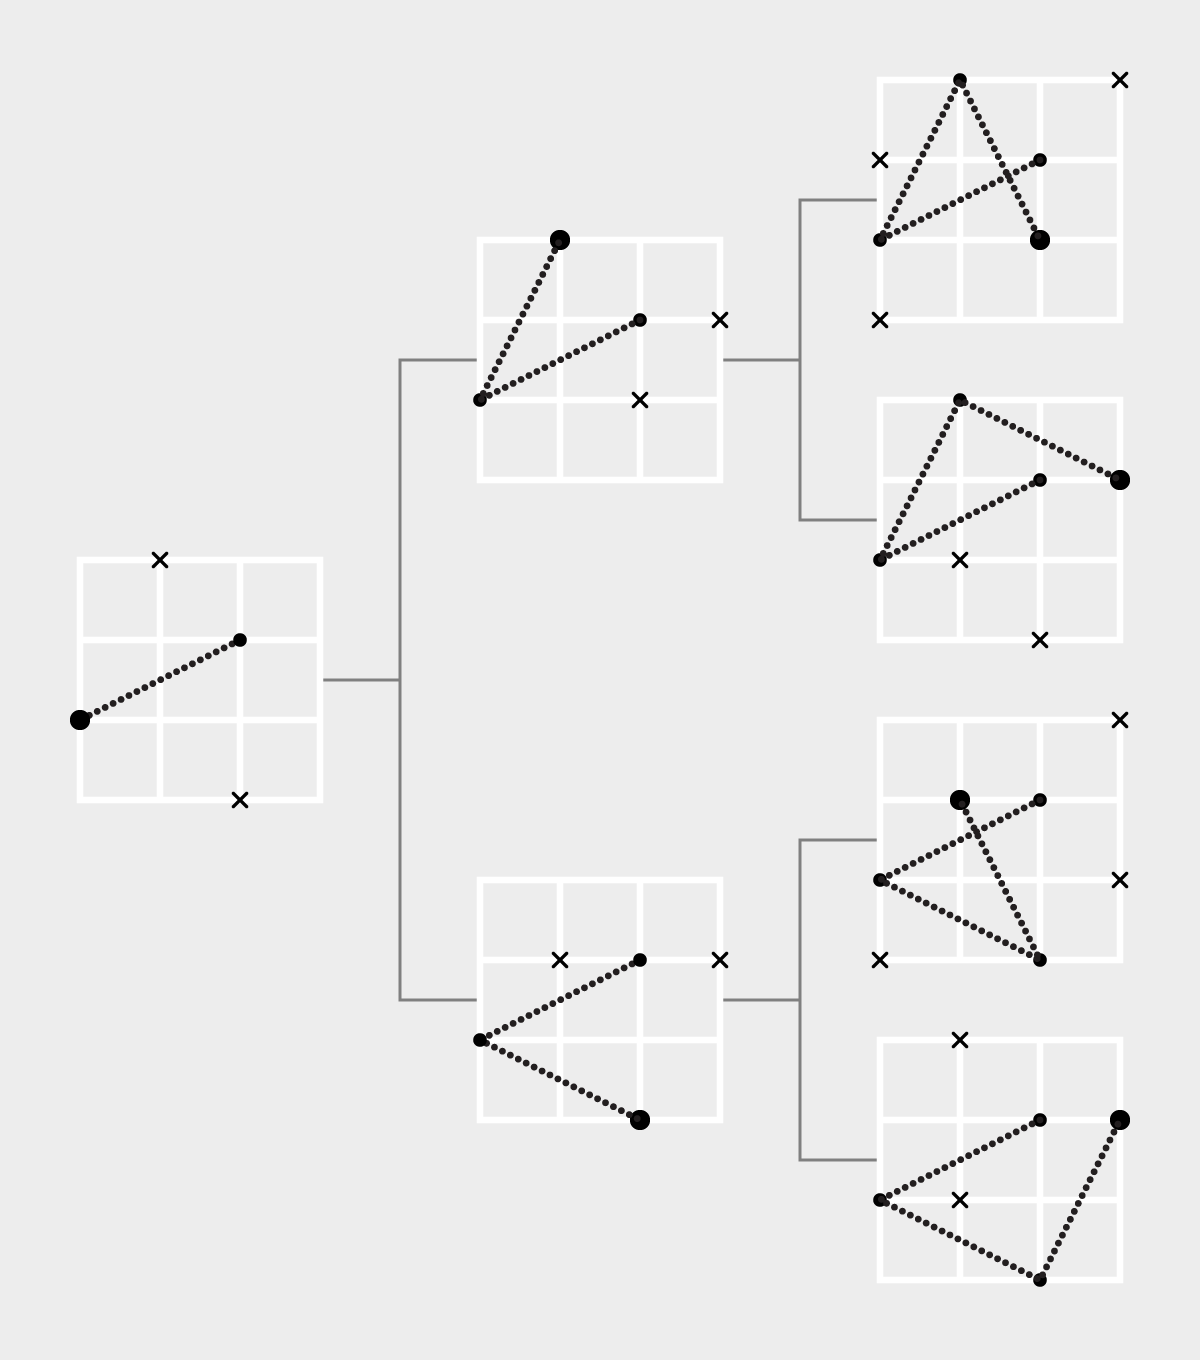 Seven 3×3 grids are shown with increasingly complex sequences of points plotted and connected by dotted lines, with X’s representing how the sequences can branch out further.